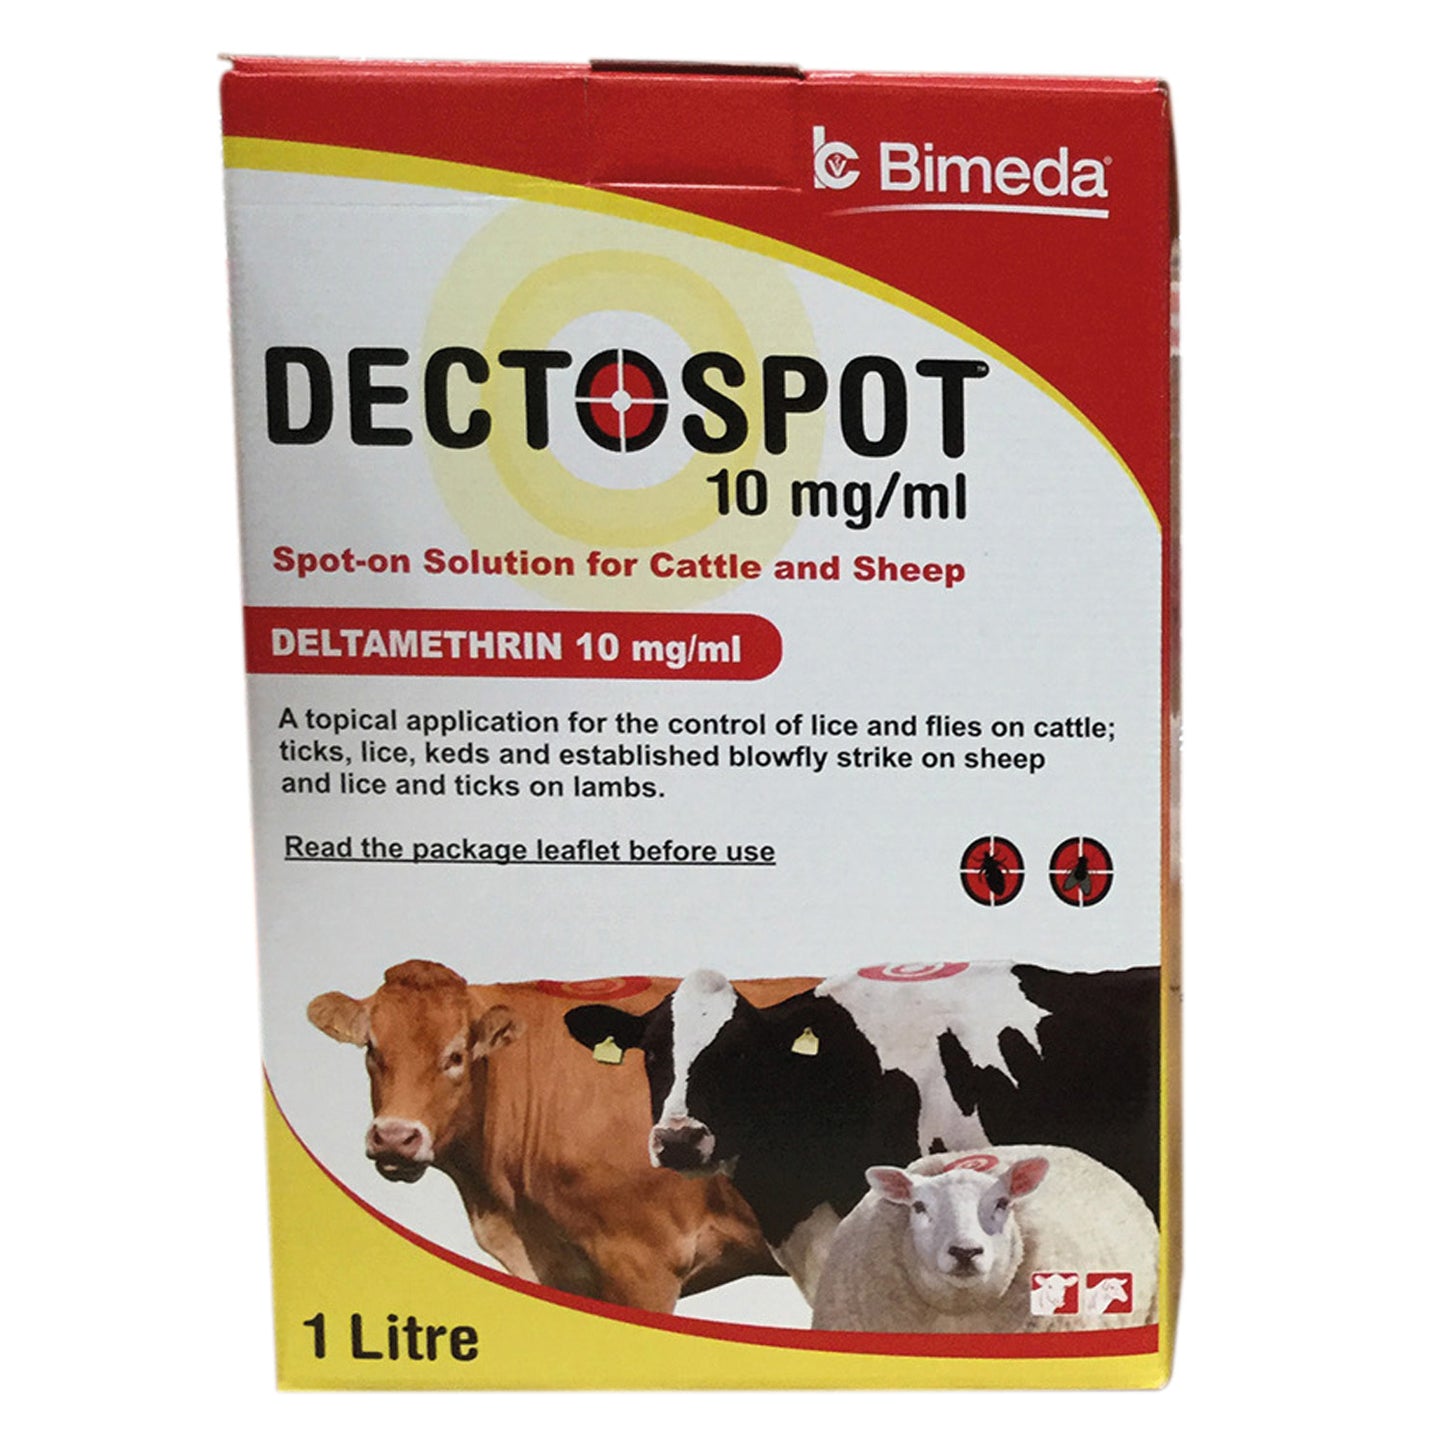 Dectospot 10 mg/ml Spot-on Solution for Cattle & Sheep